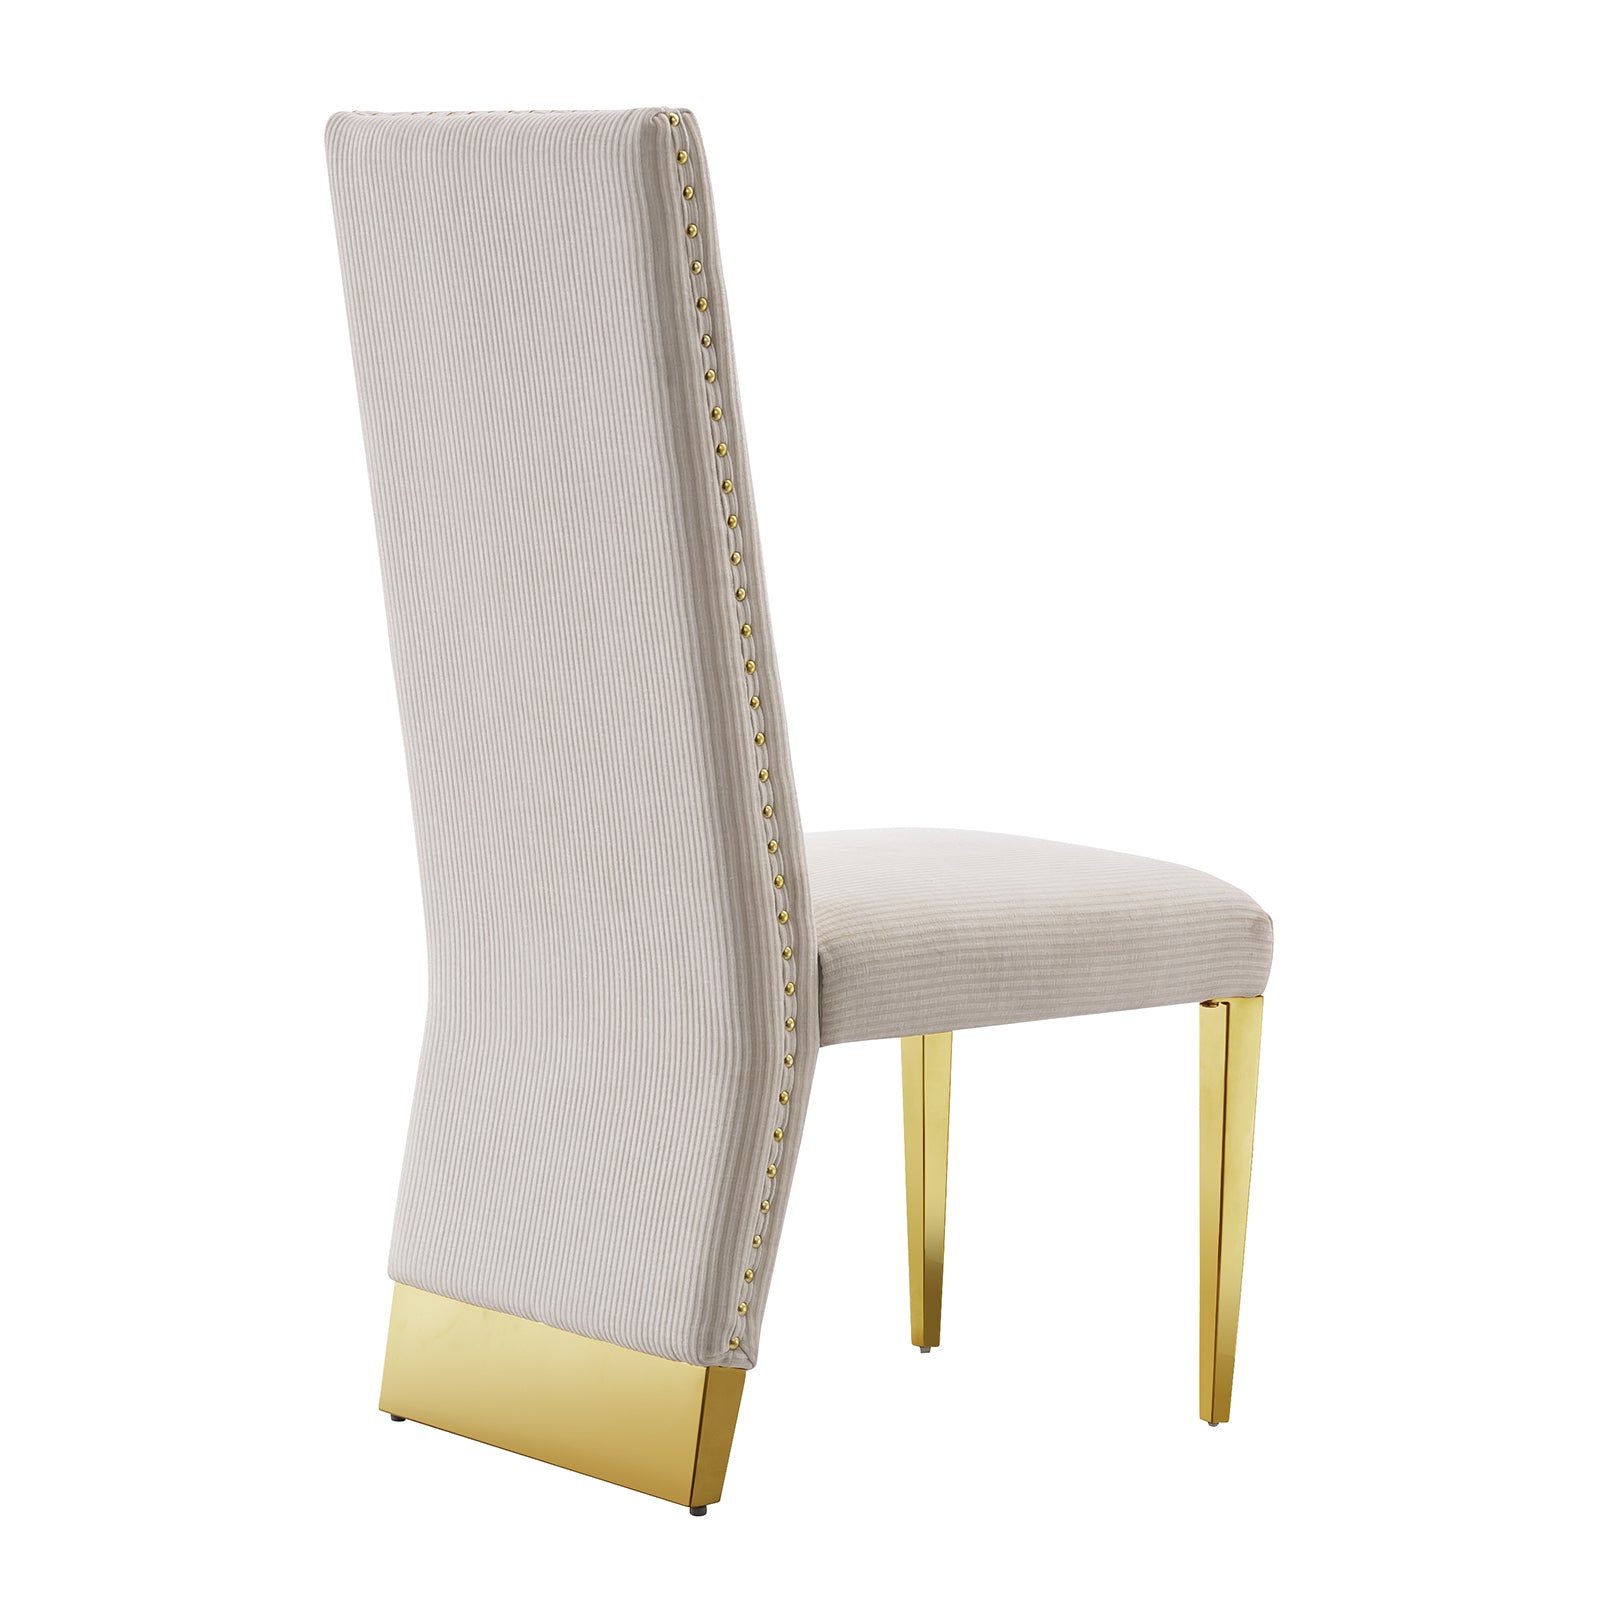 Wholesale Beige Fabric Dining Chairs